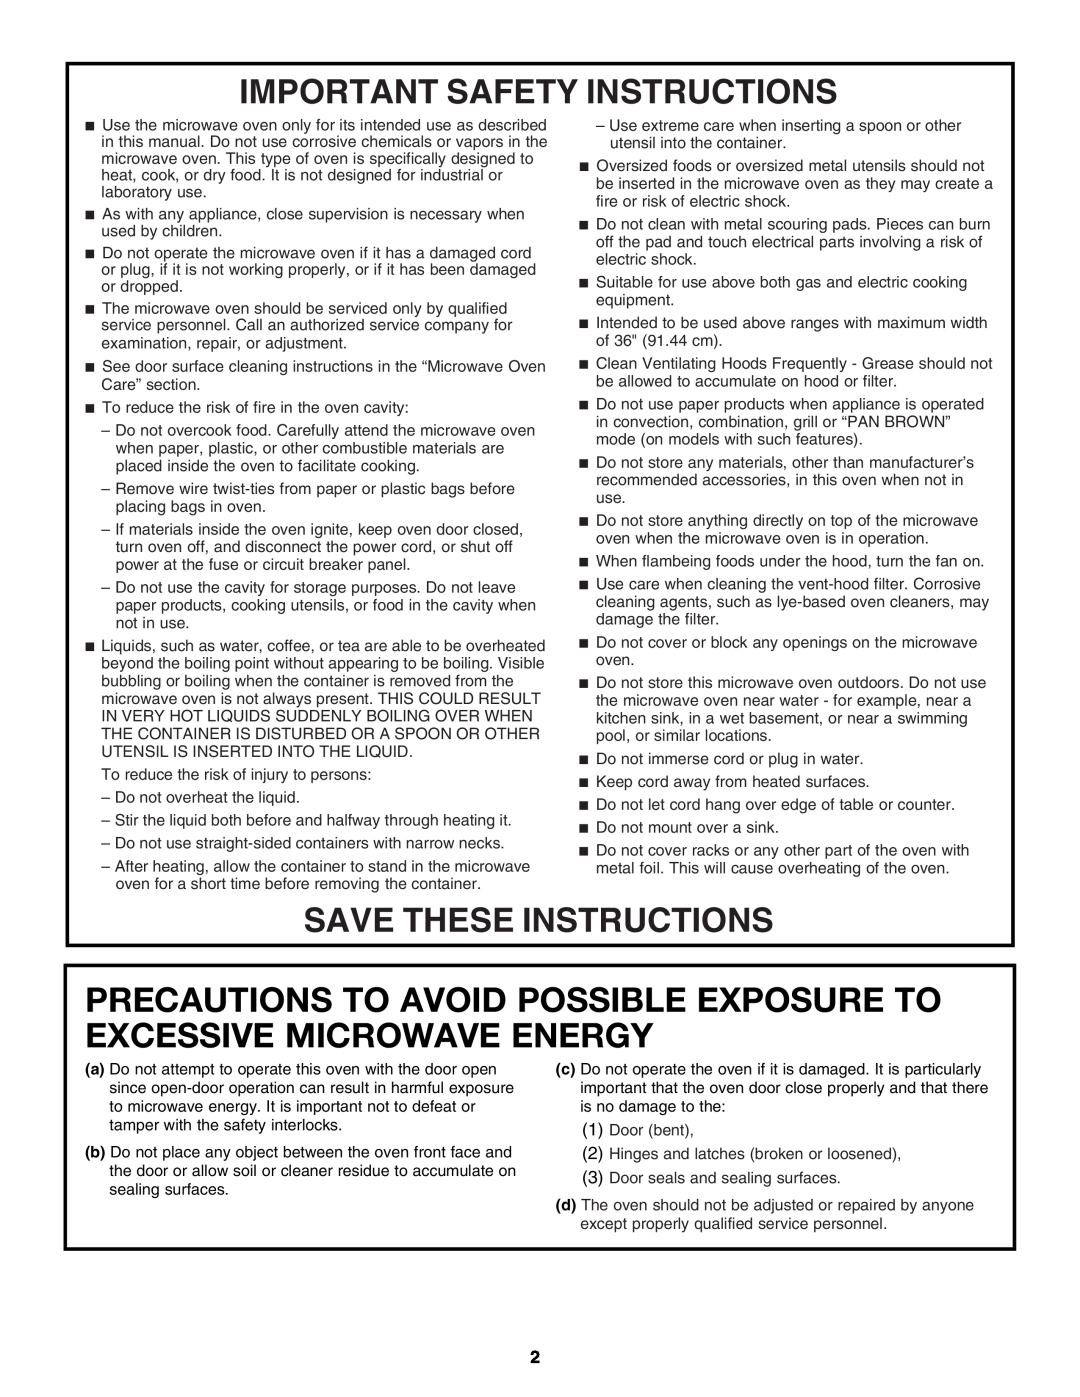 Whirlpool W10451739B Precautions To Avoid Possible Exposure To Excessive Microwave Energy, Important Safety Instructions 